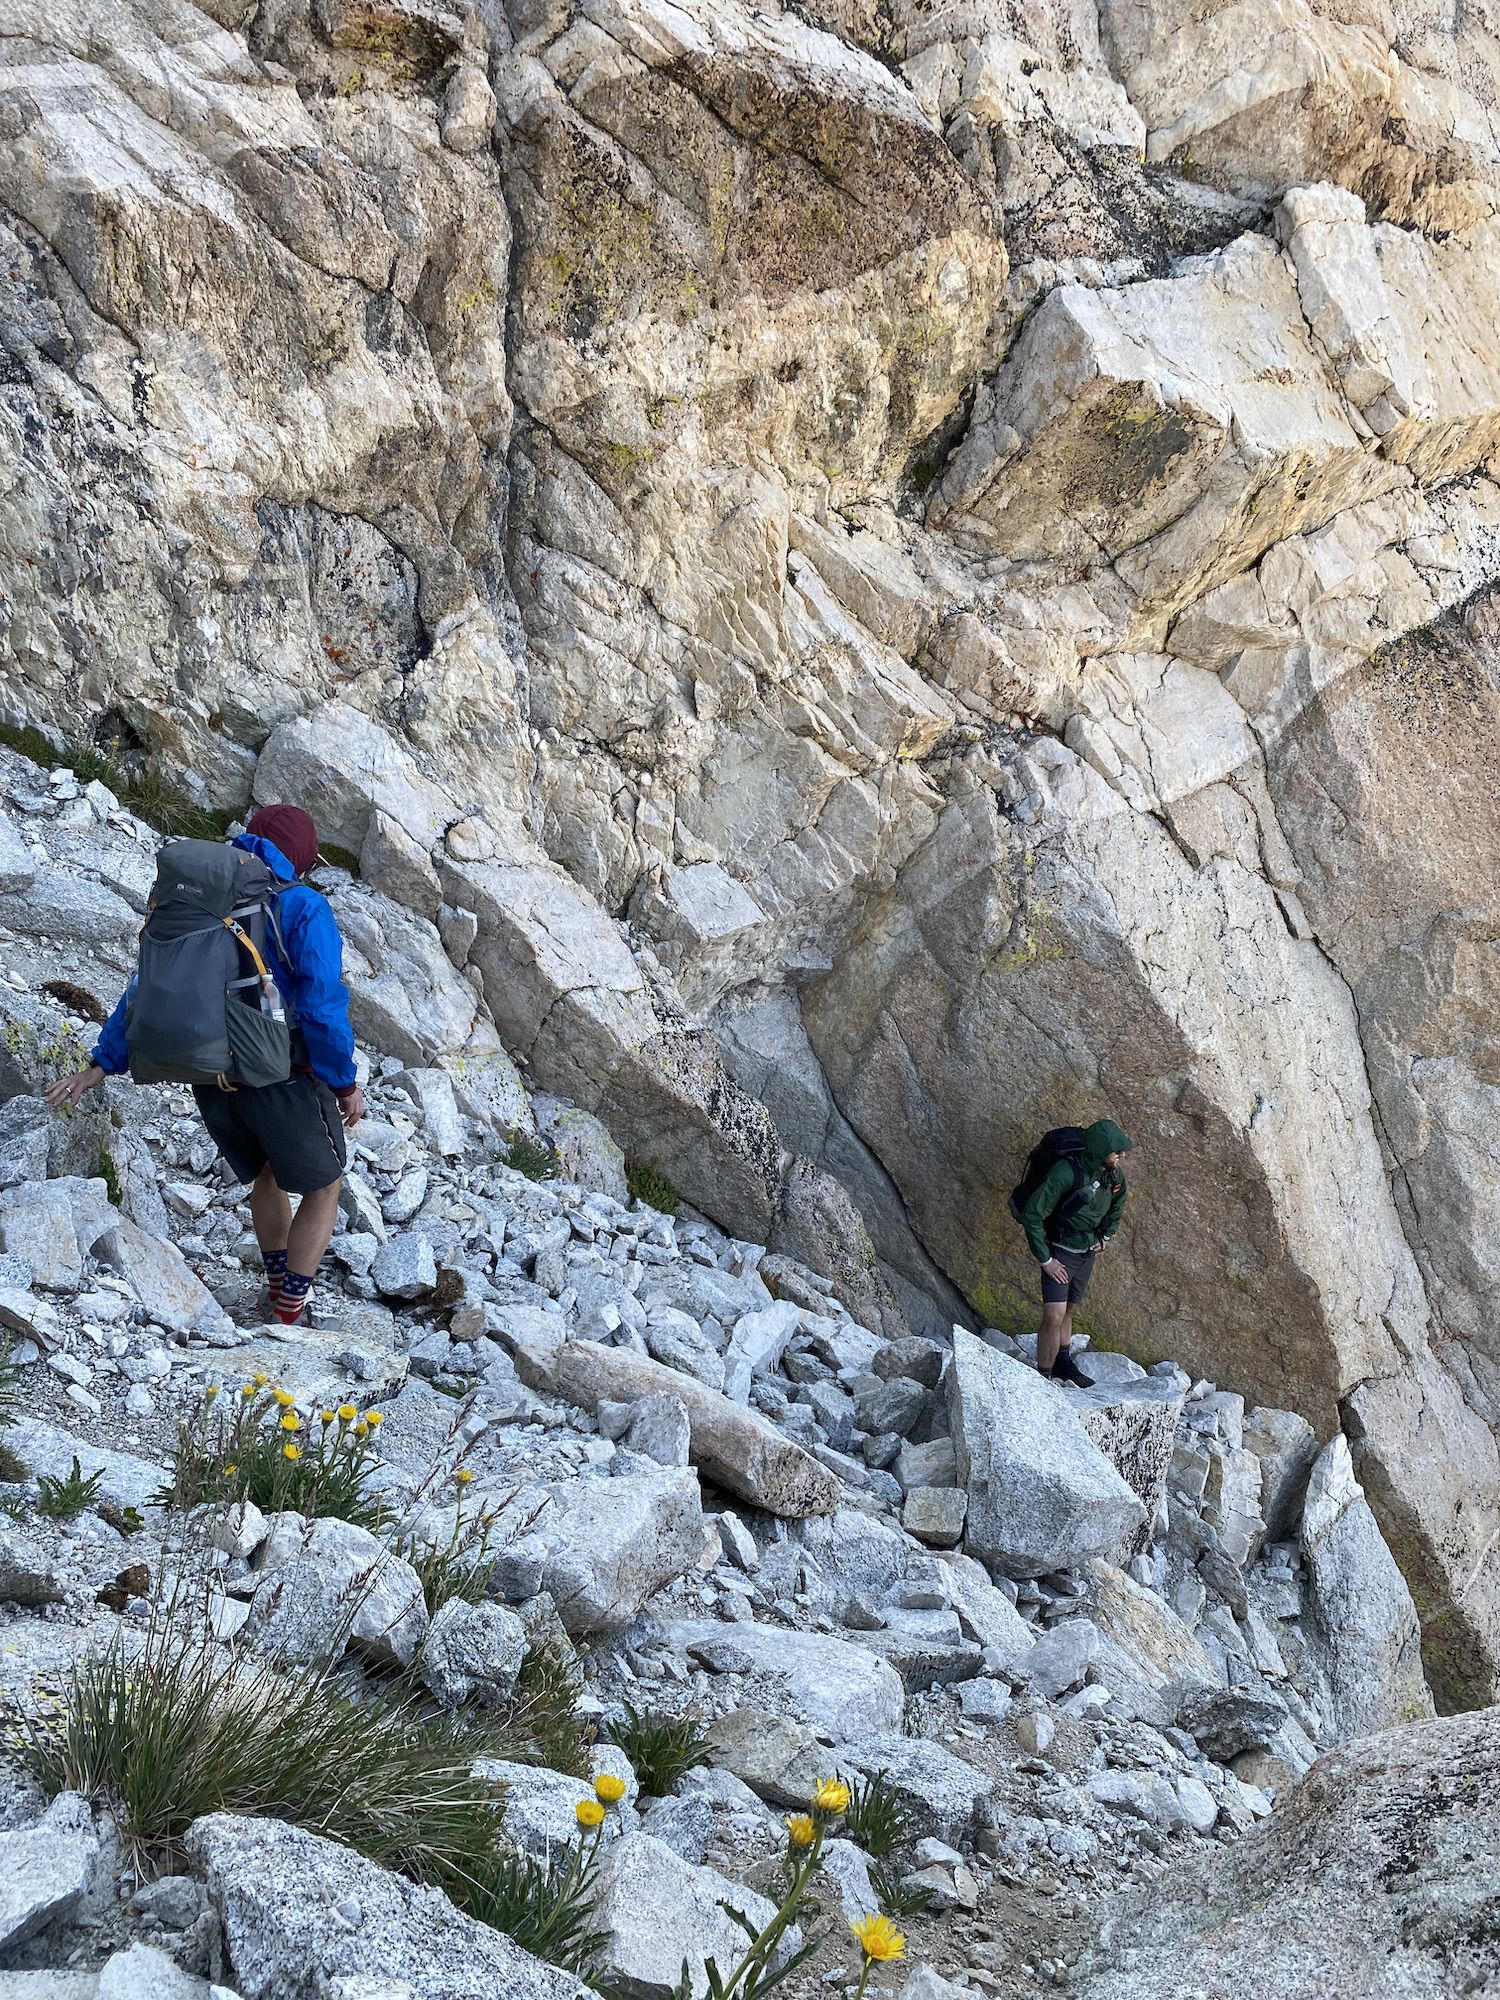 Two backpackers on steep talus with a sheer granite wall behind them.